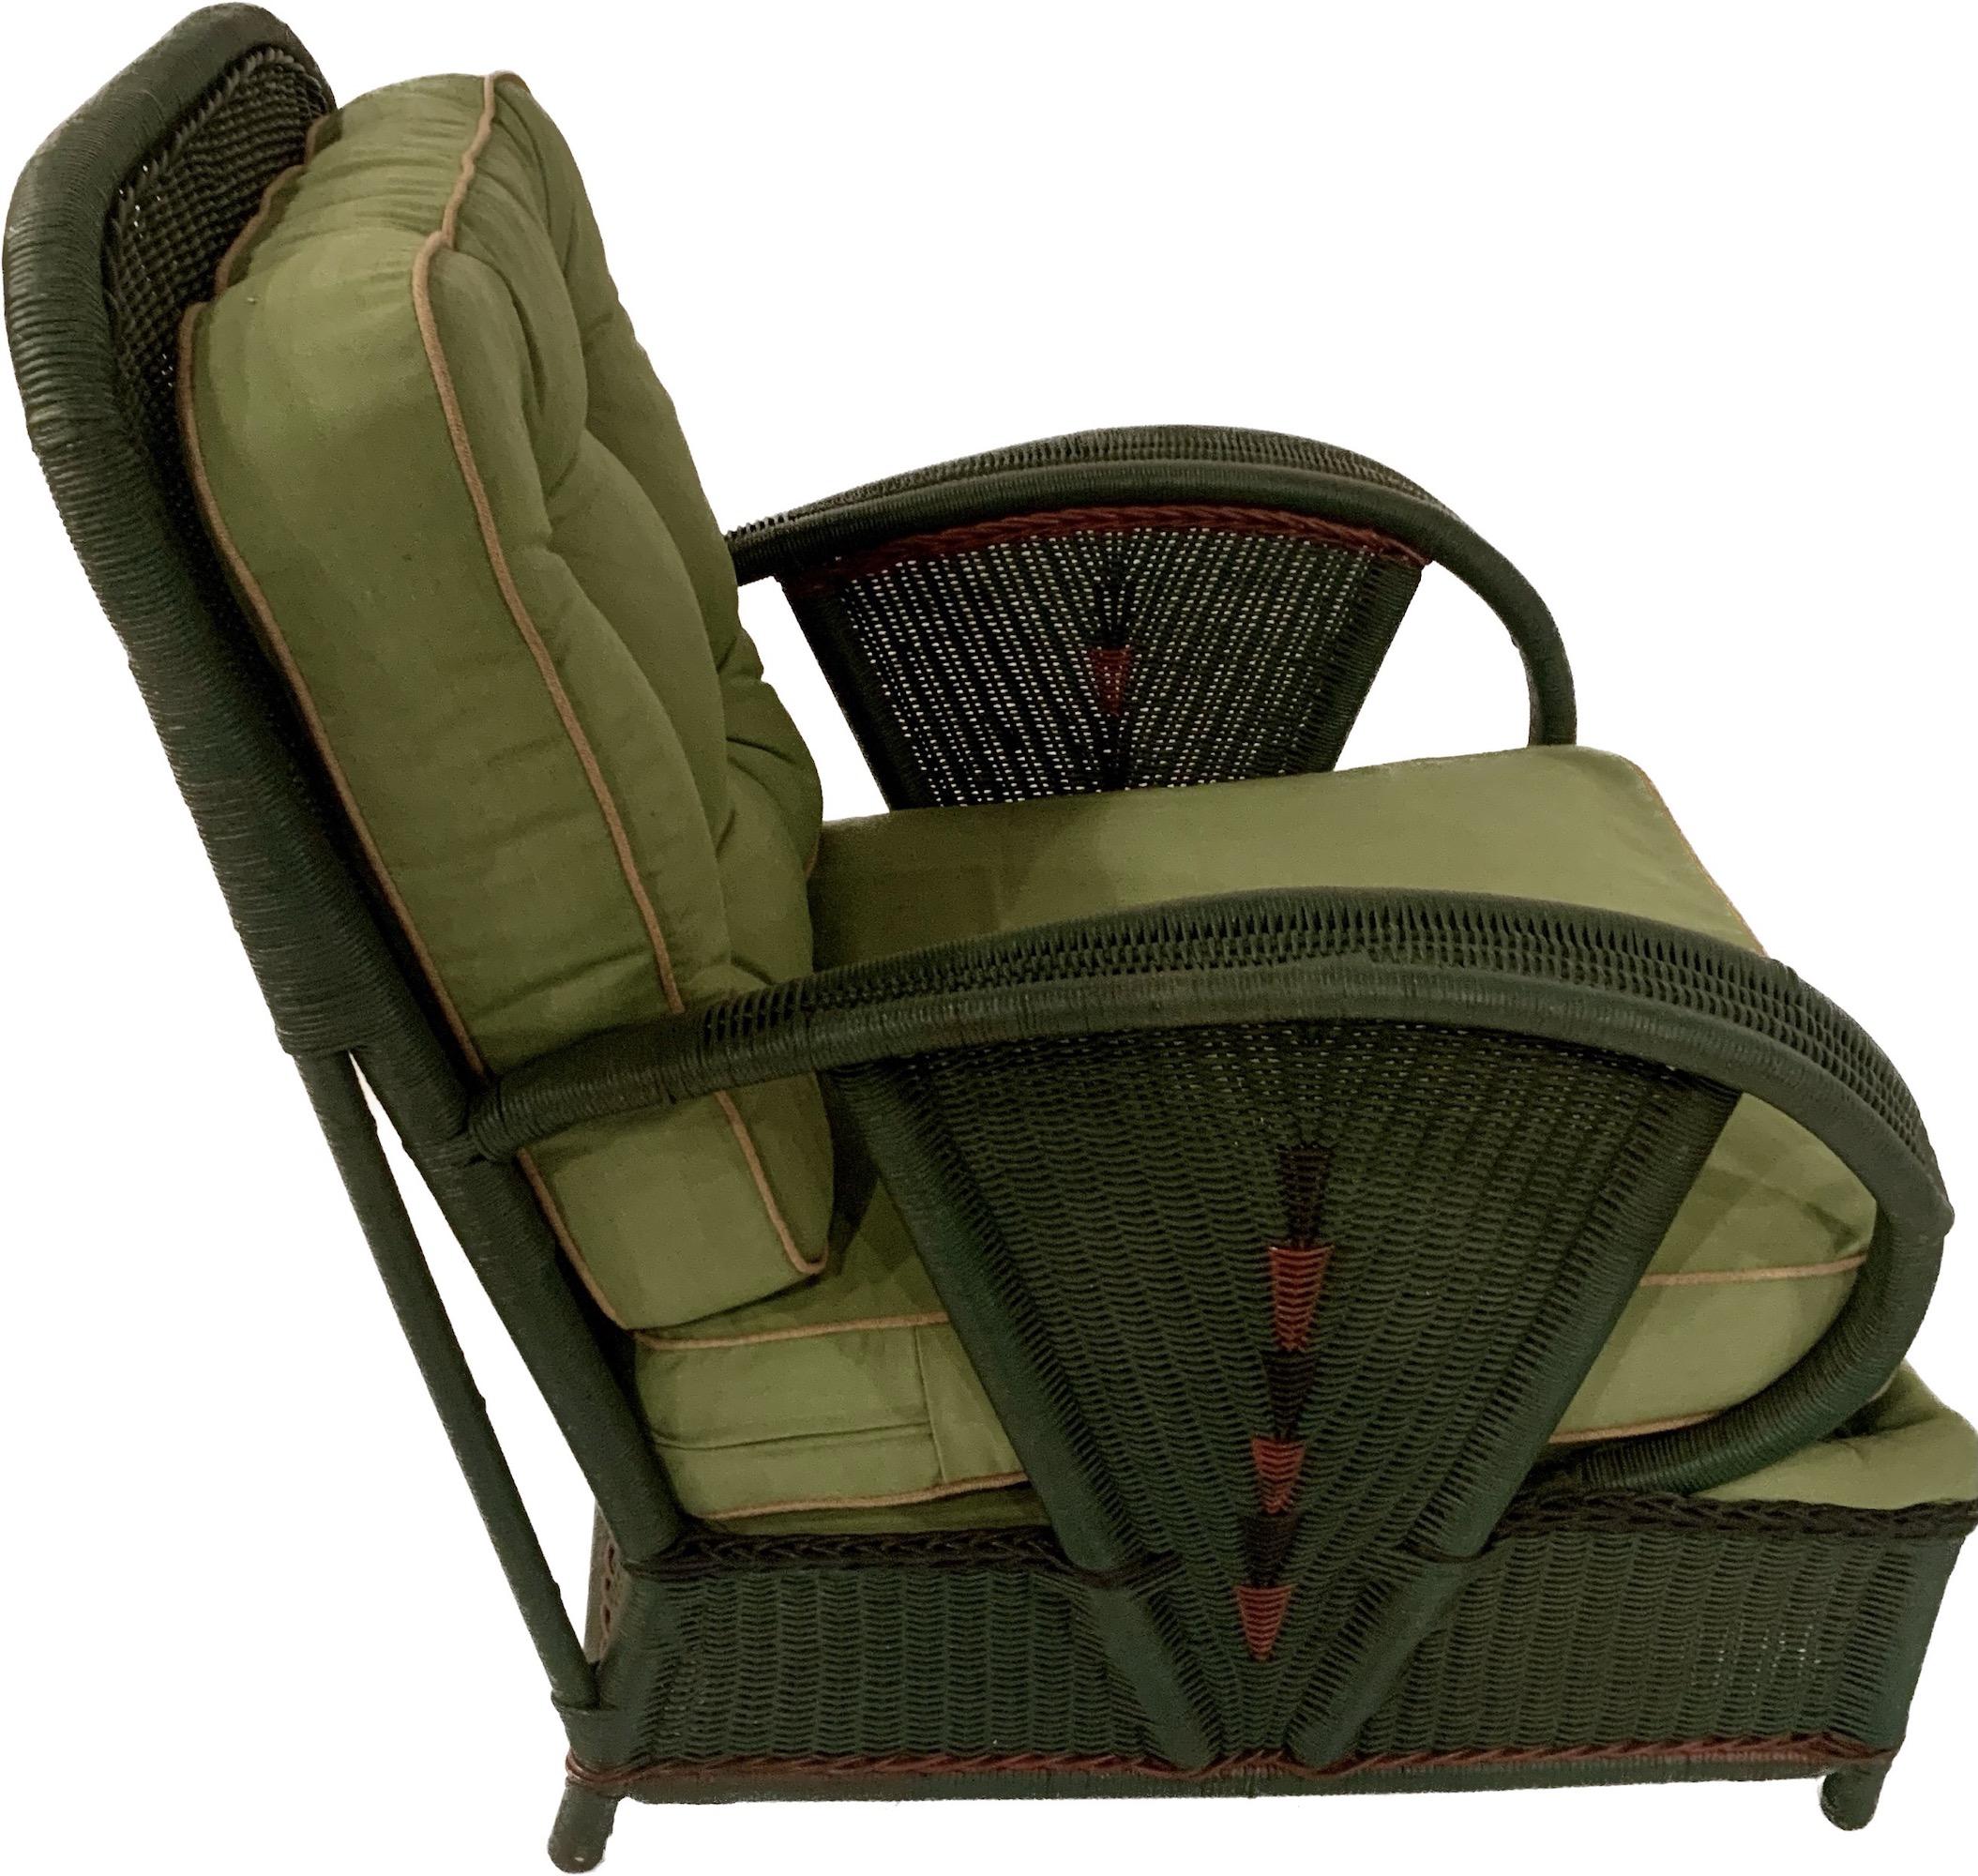 Upholstery Pair of Green Antique Wicker Art Deco Lounge Chairs with Decorative Trim For Sale